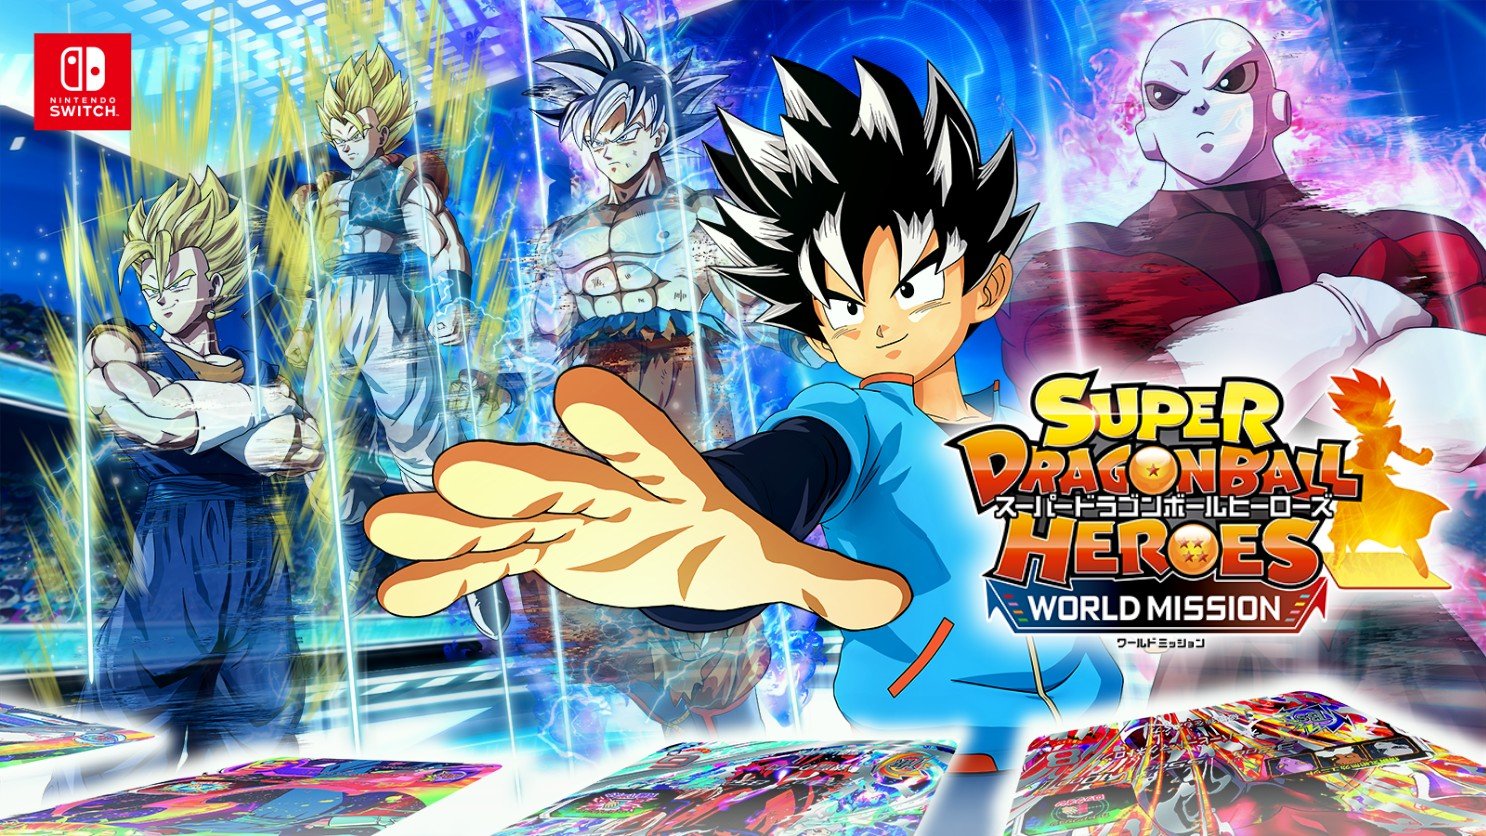 Super Dragon Ball Heroes World Mission official Japanese website